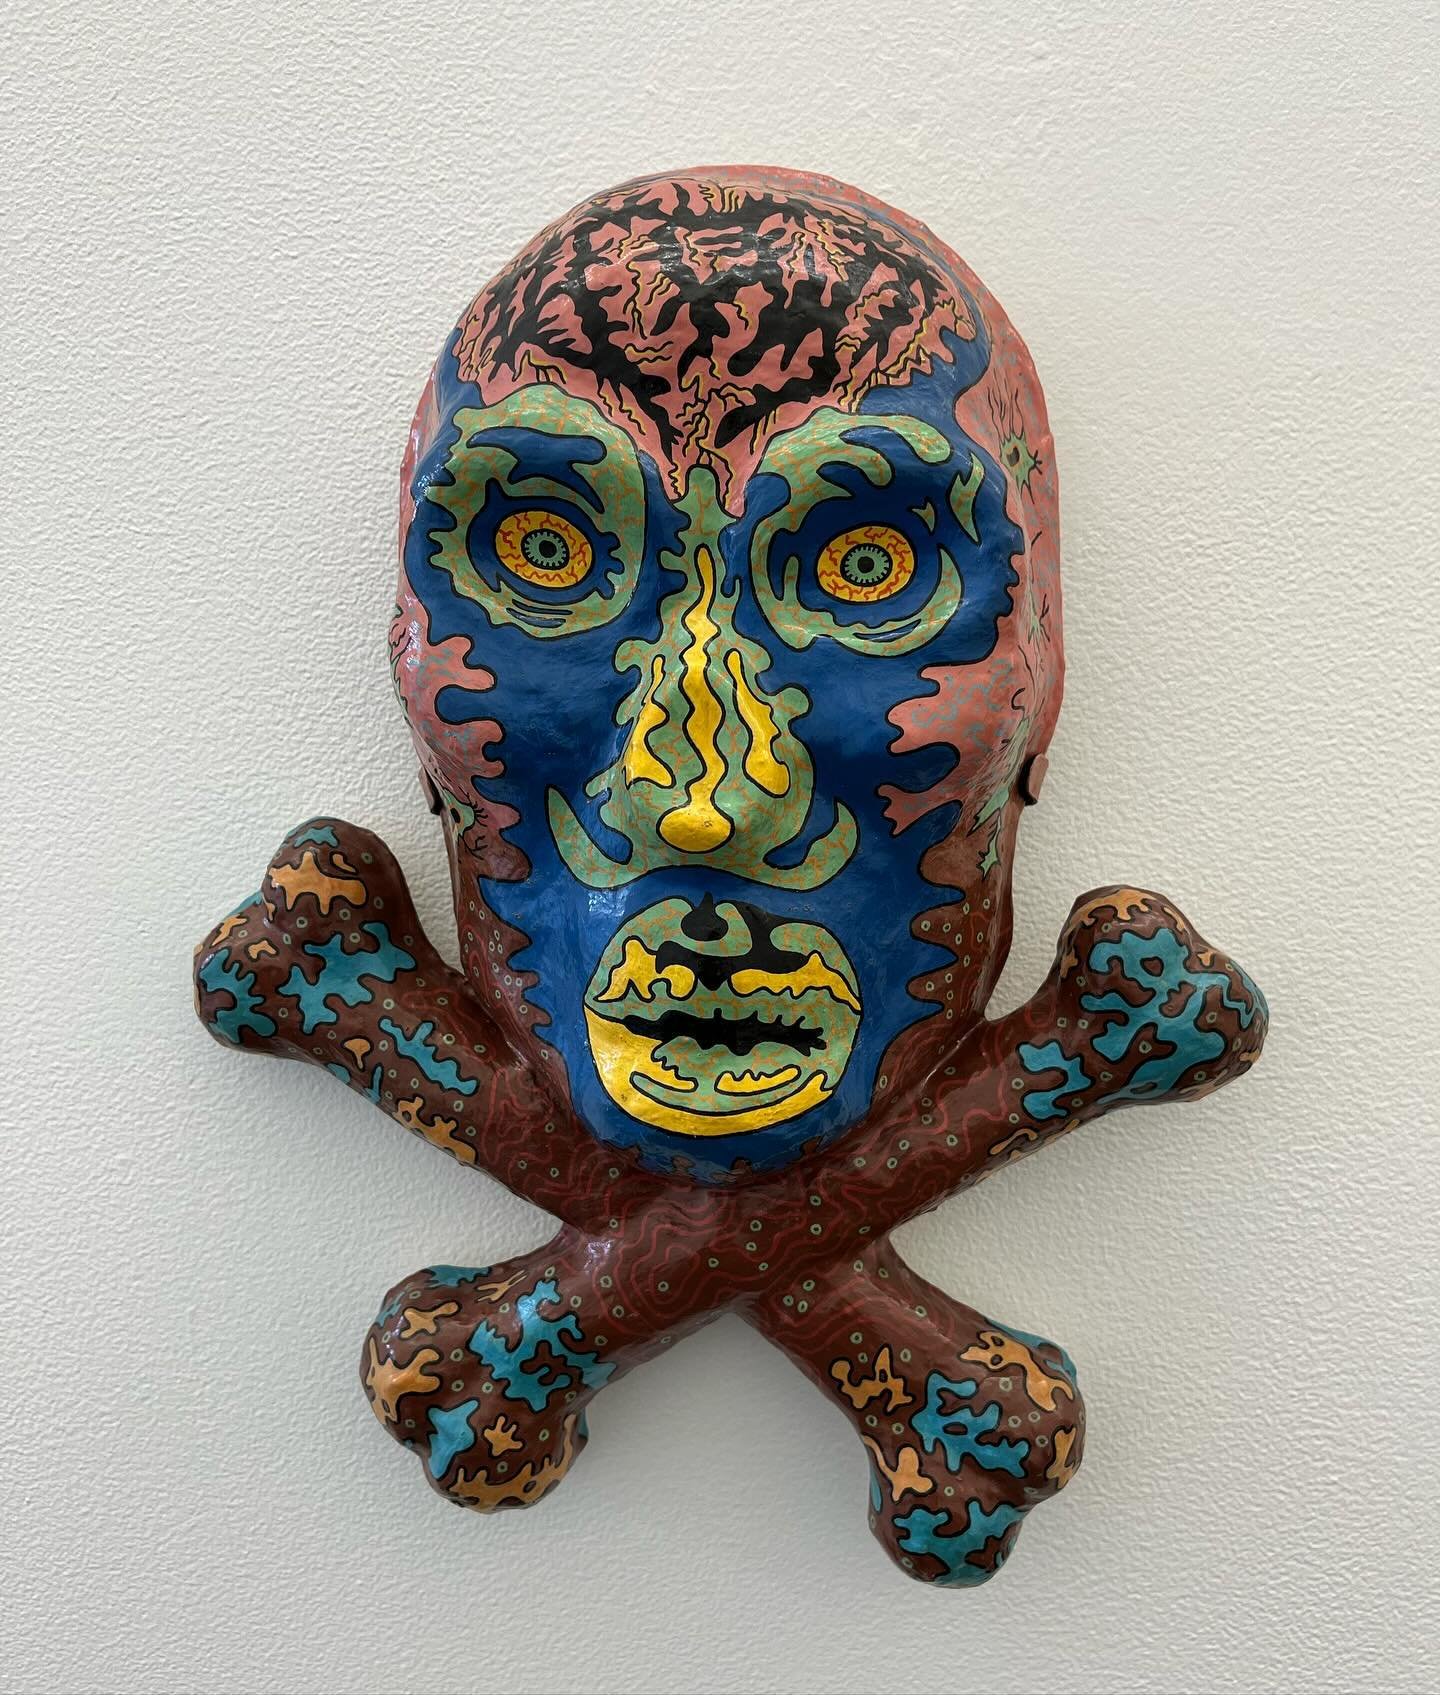 Karl Wirsum, &ldquo;Skullpture #4,&rdquo; 1968, acrylic on paper m&acirc;ch&eacute;, at @derekellergallery&rsquo;s Wirsum retrospective &ldquo;Eye Adjustment 1963-2020&rdquo; of works by the member of Chicago&rsquo;s The Hairy Who, Lower East Side.